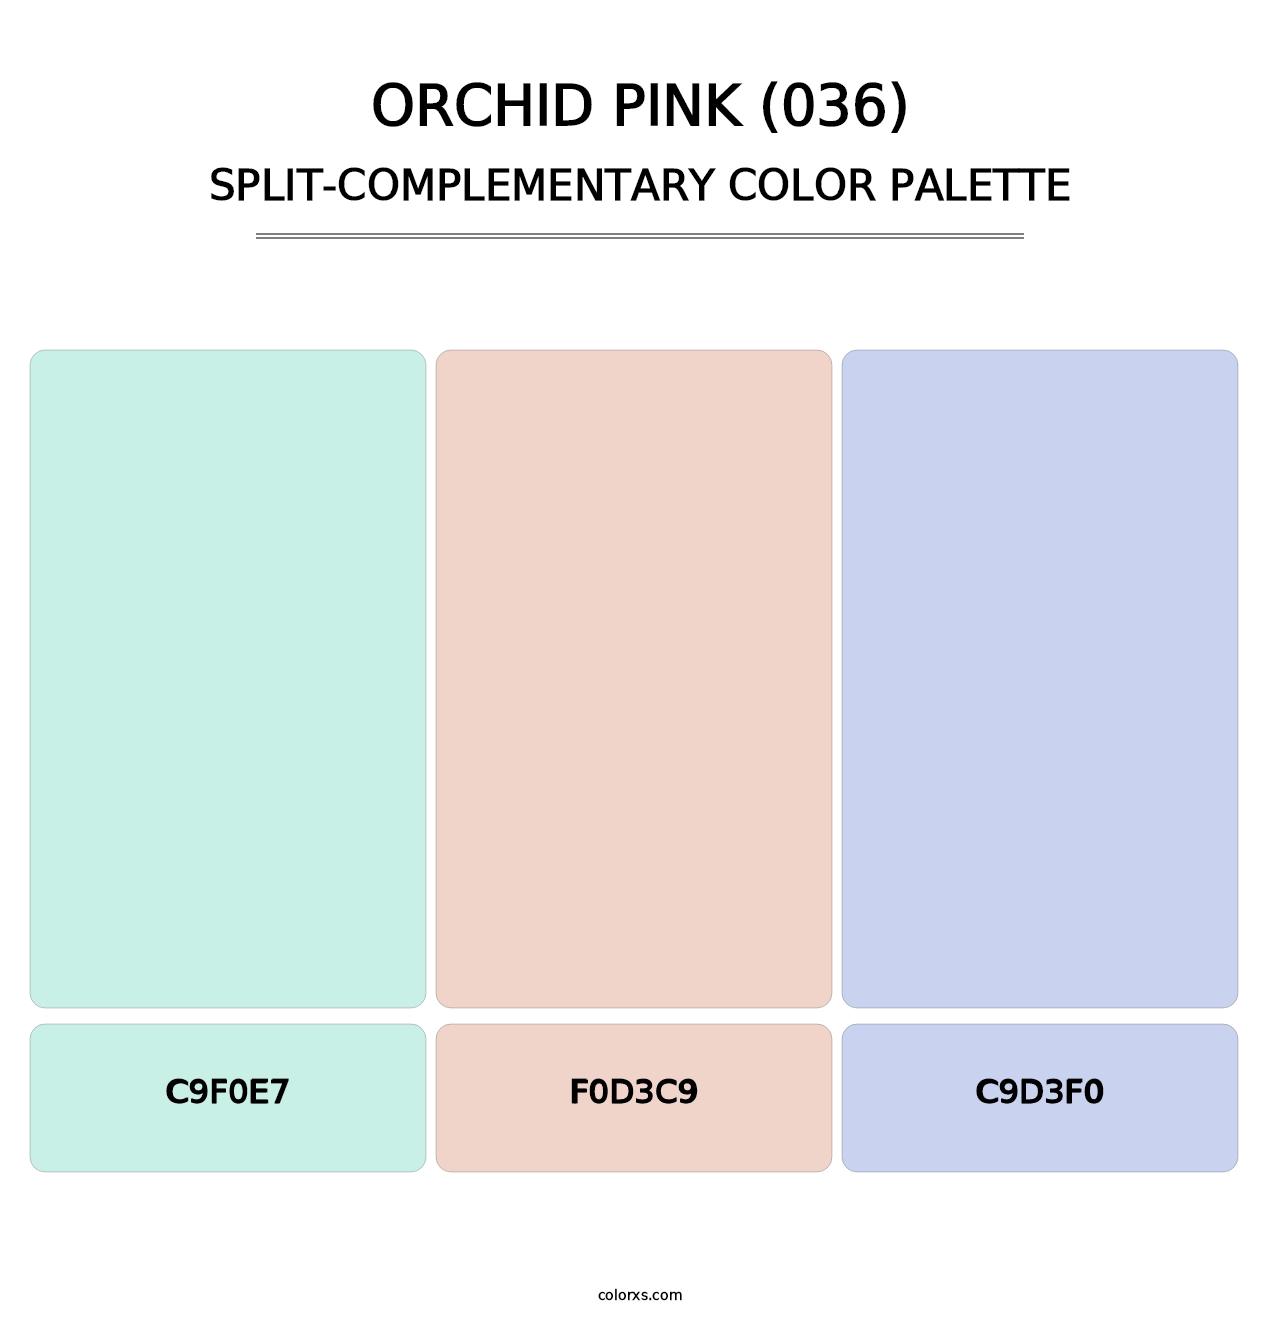 Orchid Pink (036) - Split-Complementary Color Palette